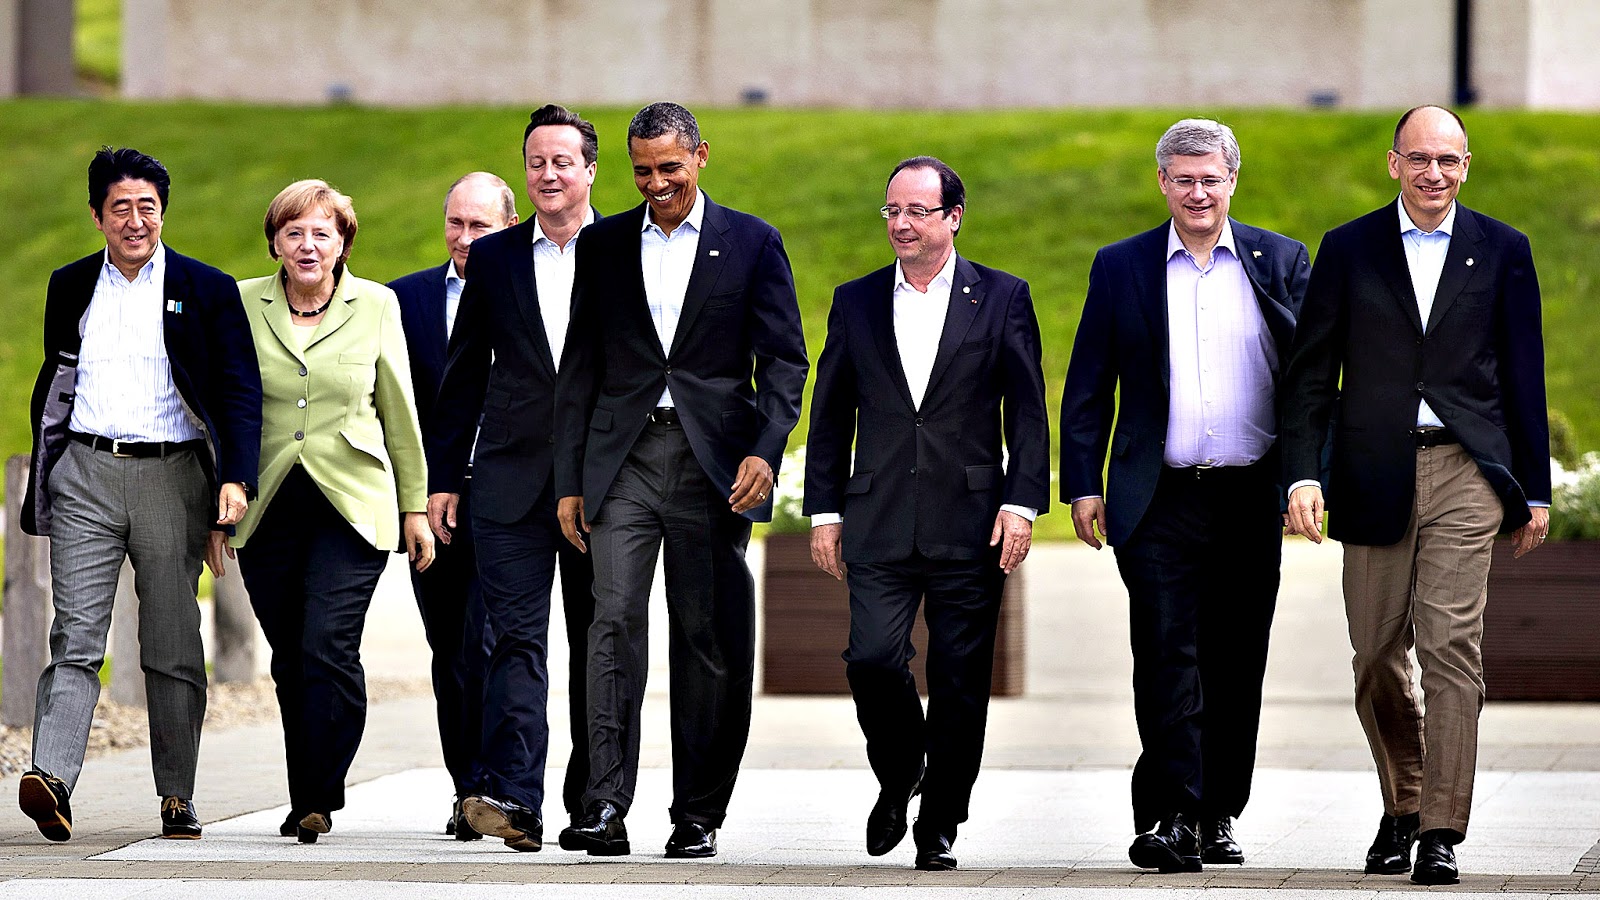 G8 Summit in Lough Erne...epa03749726 (L-R) Japanese Prime Minister Shinzo Abe, German Chancellor Angela Merkel, Russian President Vladimir Putin, British Prime Minister David Cameron, US President Barack Obama, French President Francois Hollande, Canadian Prime Minister Stephen Harper and Italian Prime Minister Enrico Letta arrive for a family photo on the second day of the G8 Summit at Lough Erne, Northern Ireland, Britain, 18 June 2013. Leaders from Canada, France, Germany, Italy, Japan, Russia, USA and UK are meeting at Lough Erne in Northern Ireland for the G8 Summit 17-18 June. The leaders were holding their second and final day of talks on 18 June, with the global economy and tax avoidance high on the agenda. EPA/KERIM OKTEN